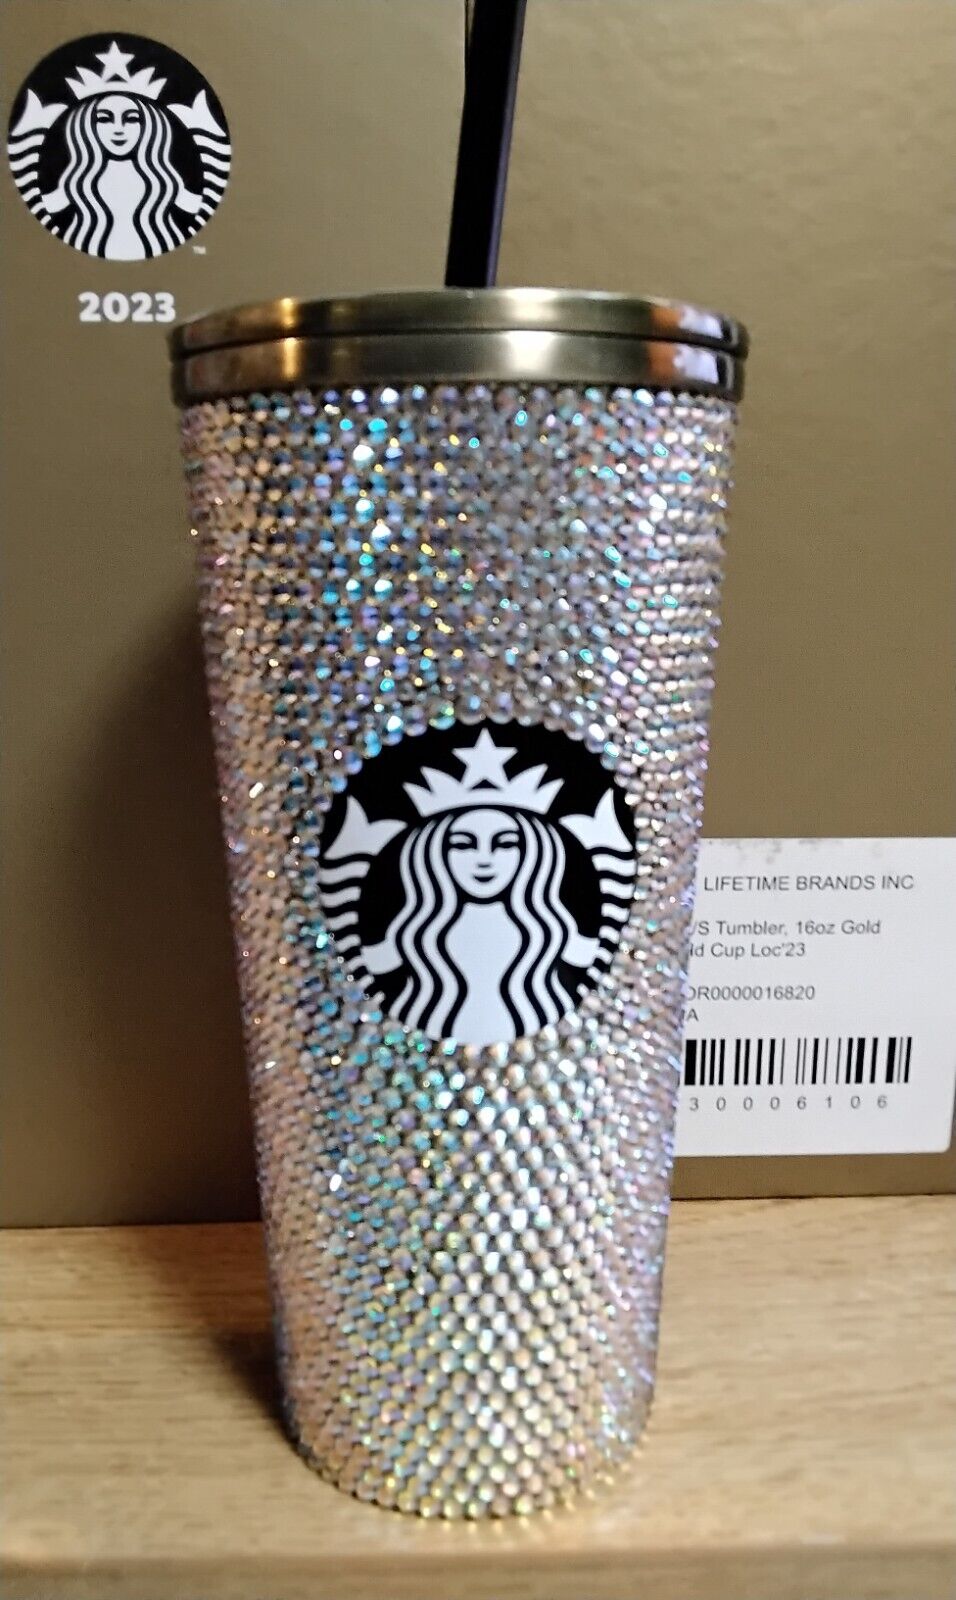 2023 STARBUCKS PHILIPPINES GOLD RHINESTONE STAINLESS STEEL COLD CUP NEW W/ BOX